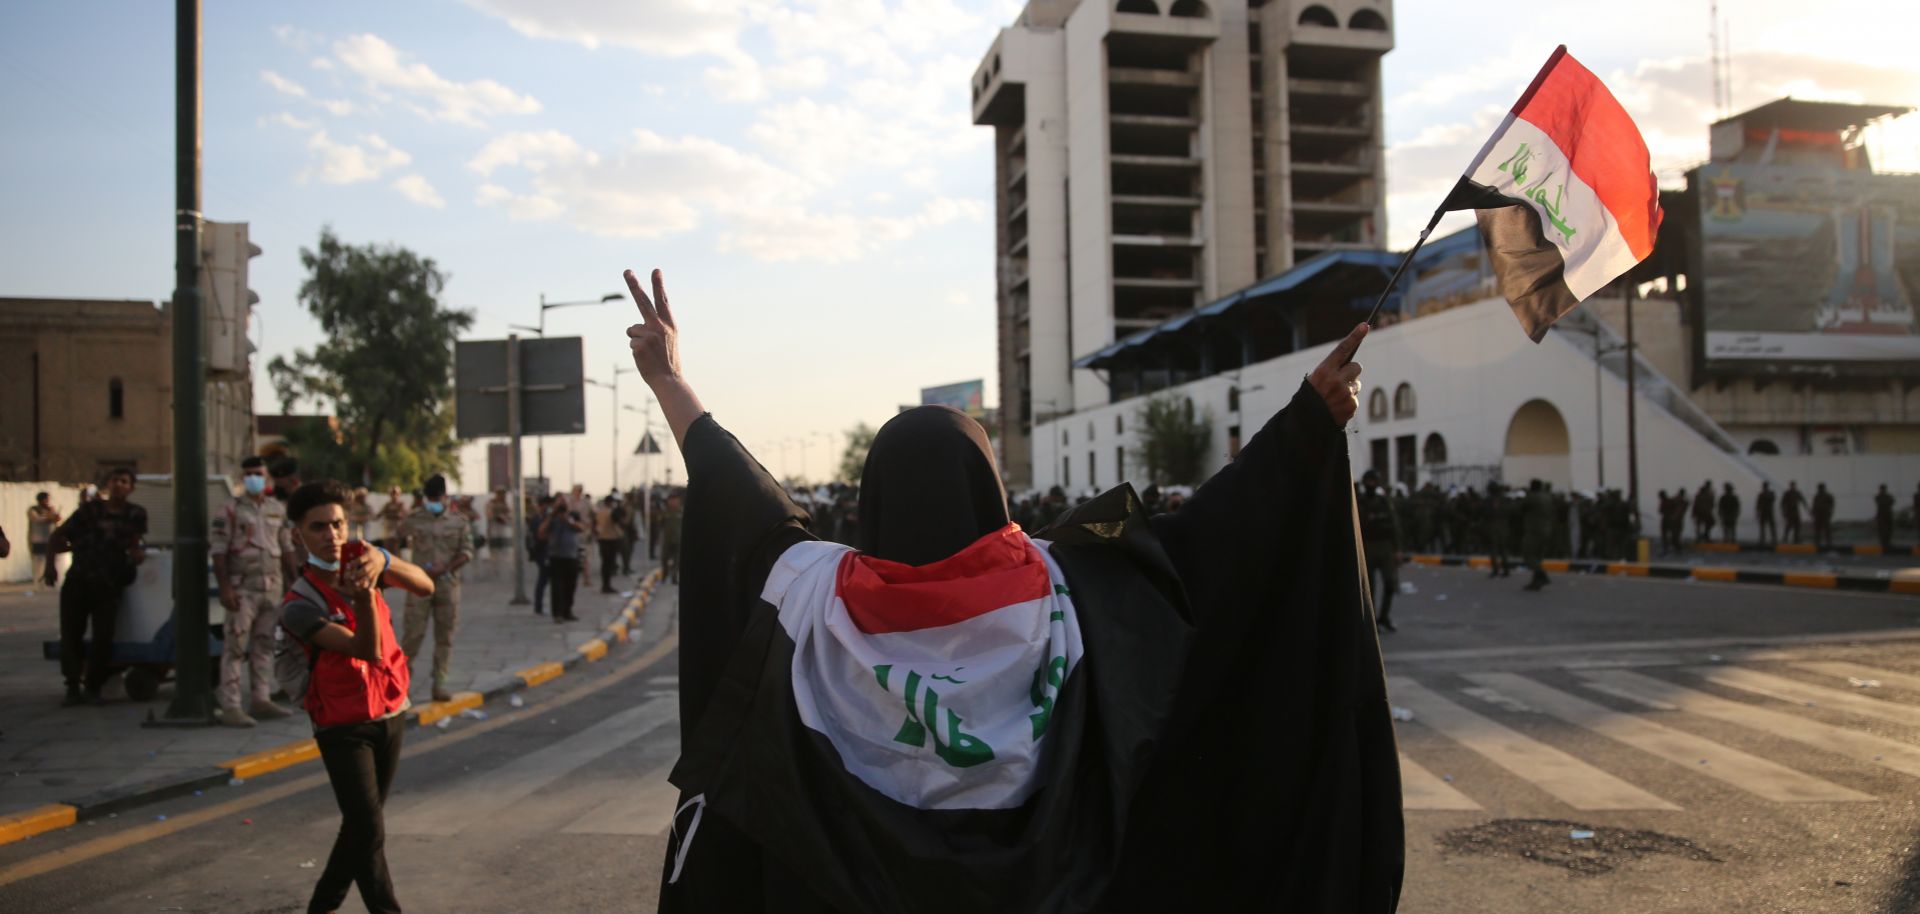 A woman waves an Iraqi flag as riot police charge toward protesters in Baghdad on May 25, 2021.